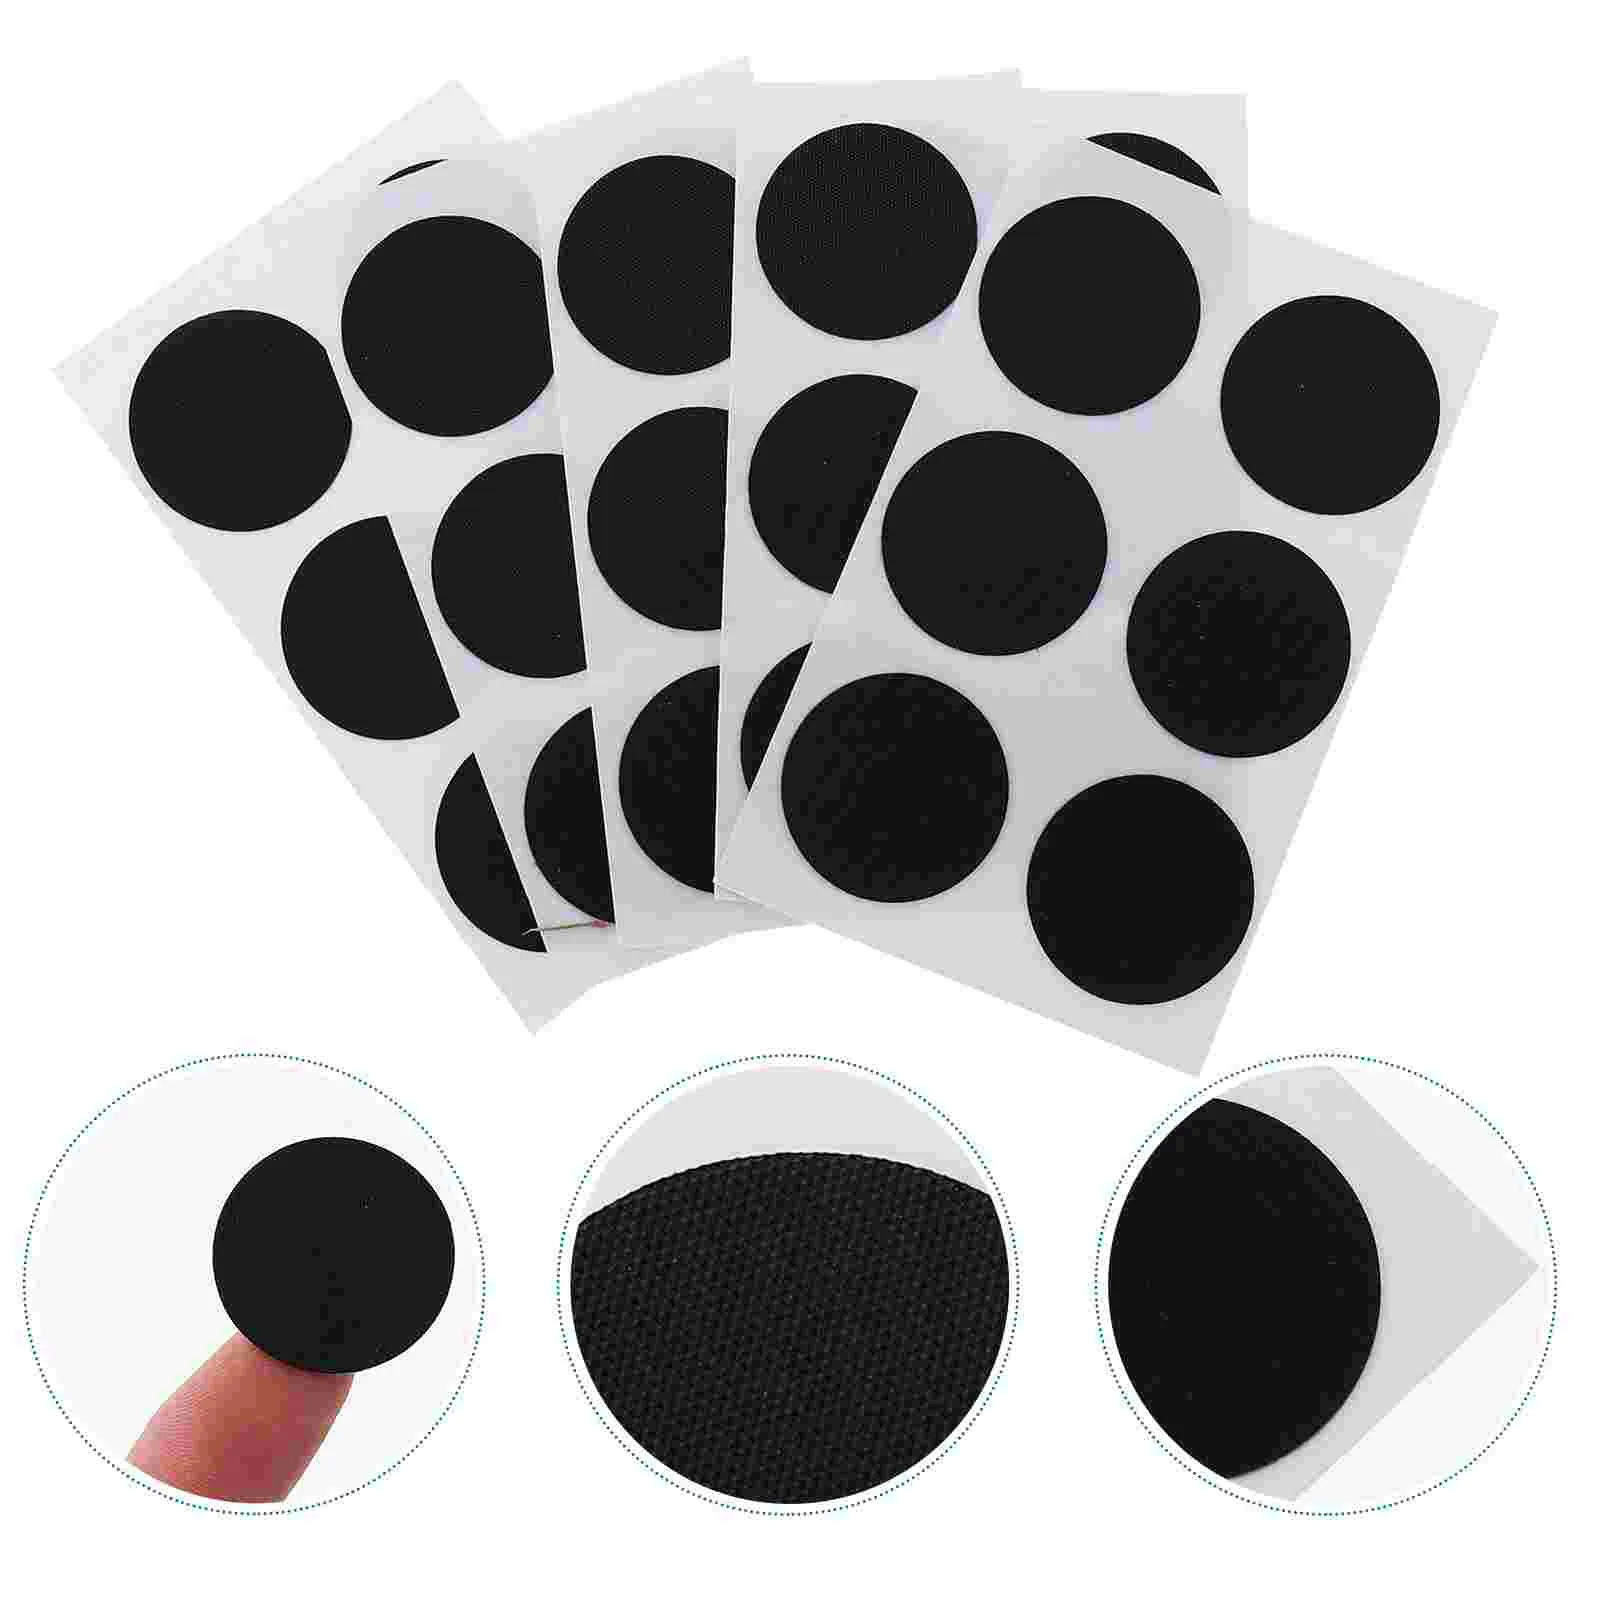 

30pcs Bike Puncture Repair Patches Self Adhesive Kit Tire Self-Adhesive Patches